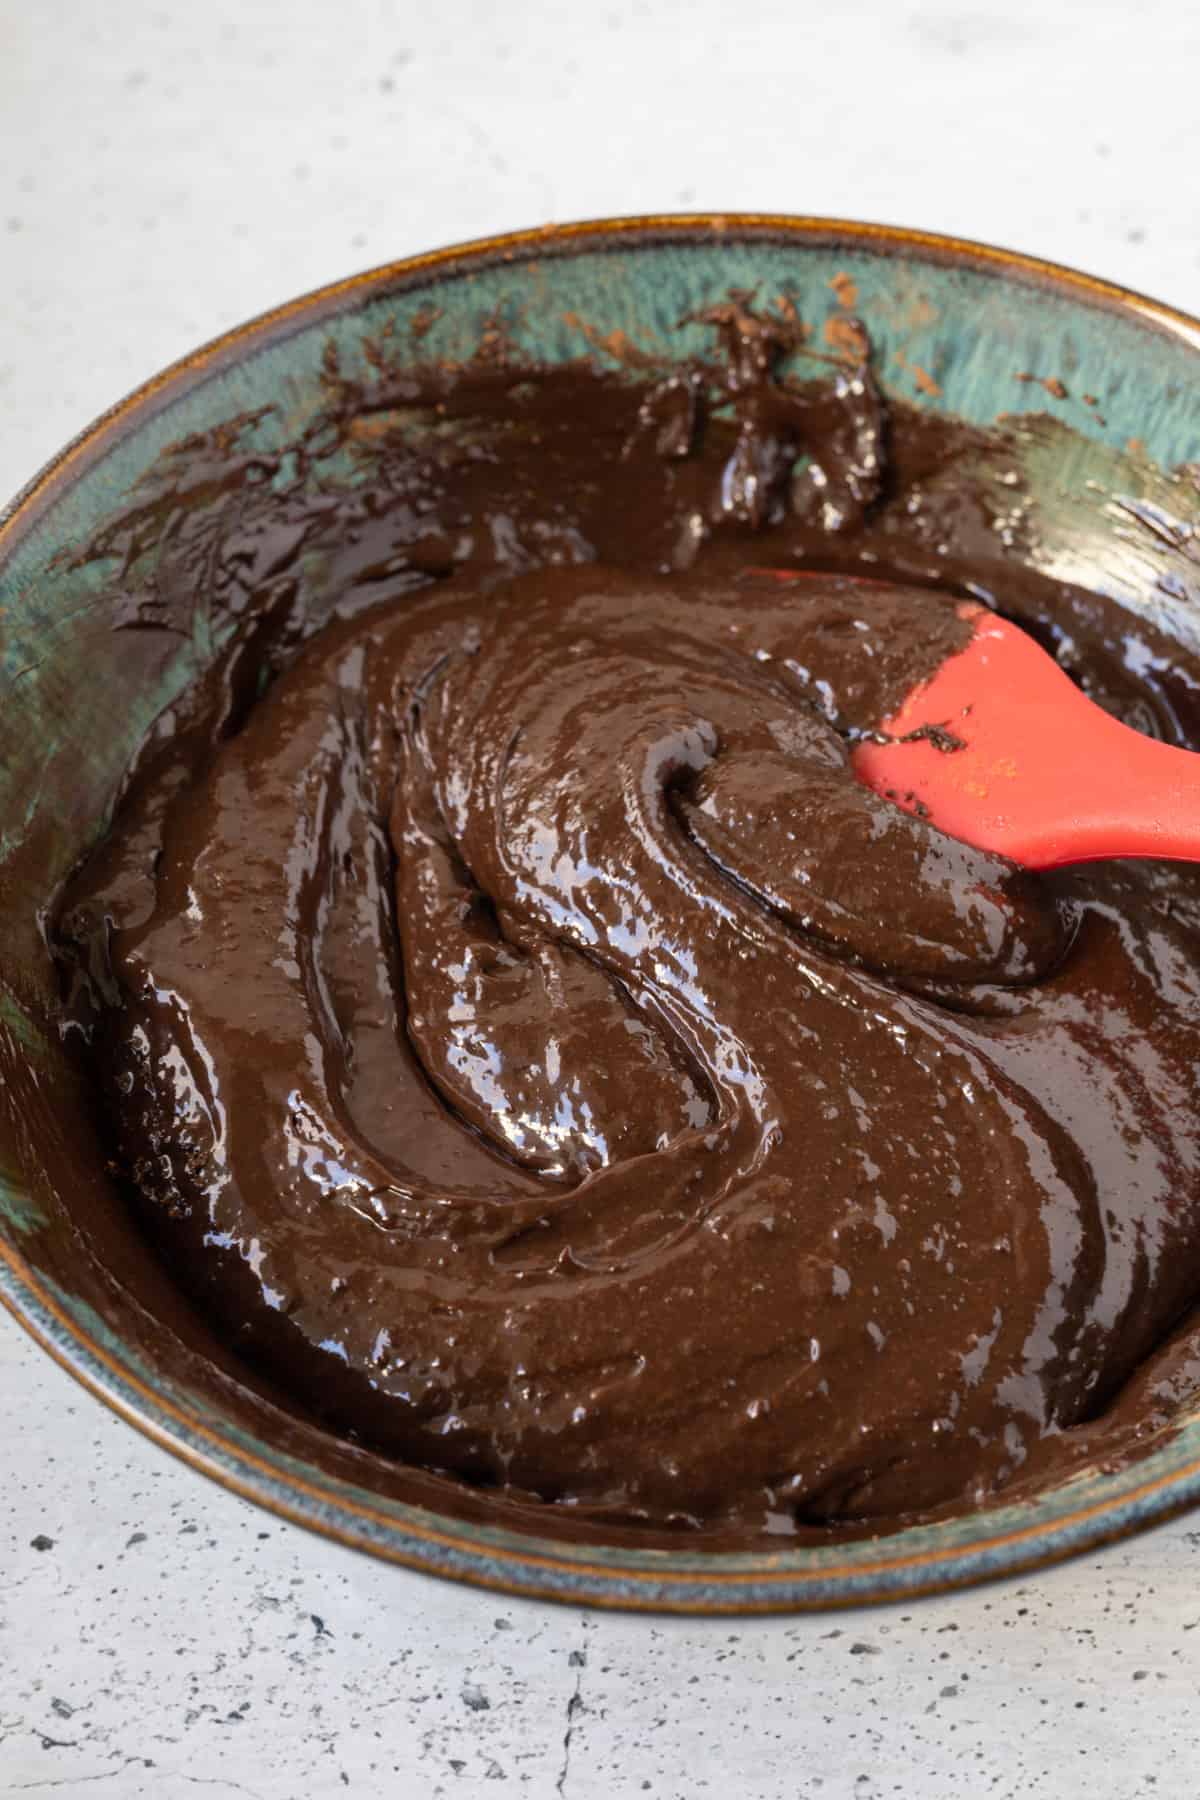 The chocolate truffle mixture stirred together until smooth.